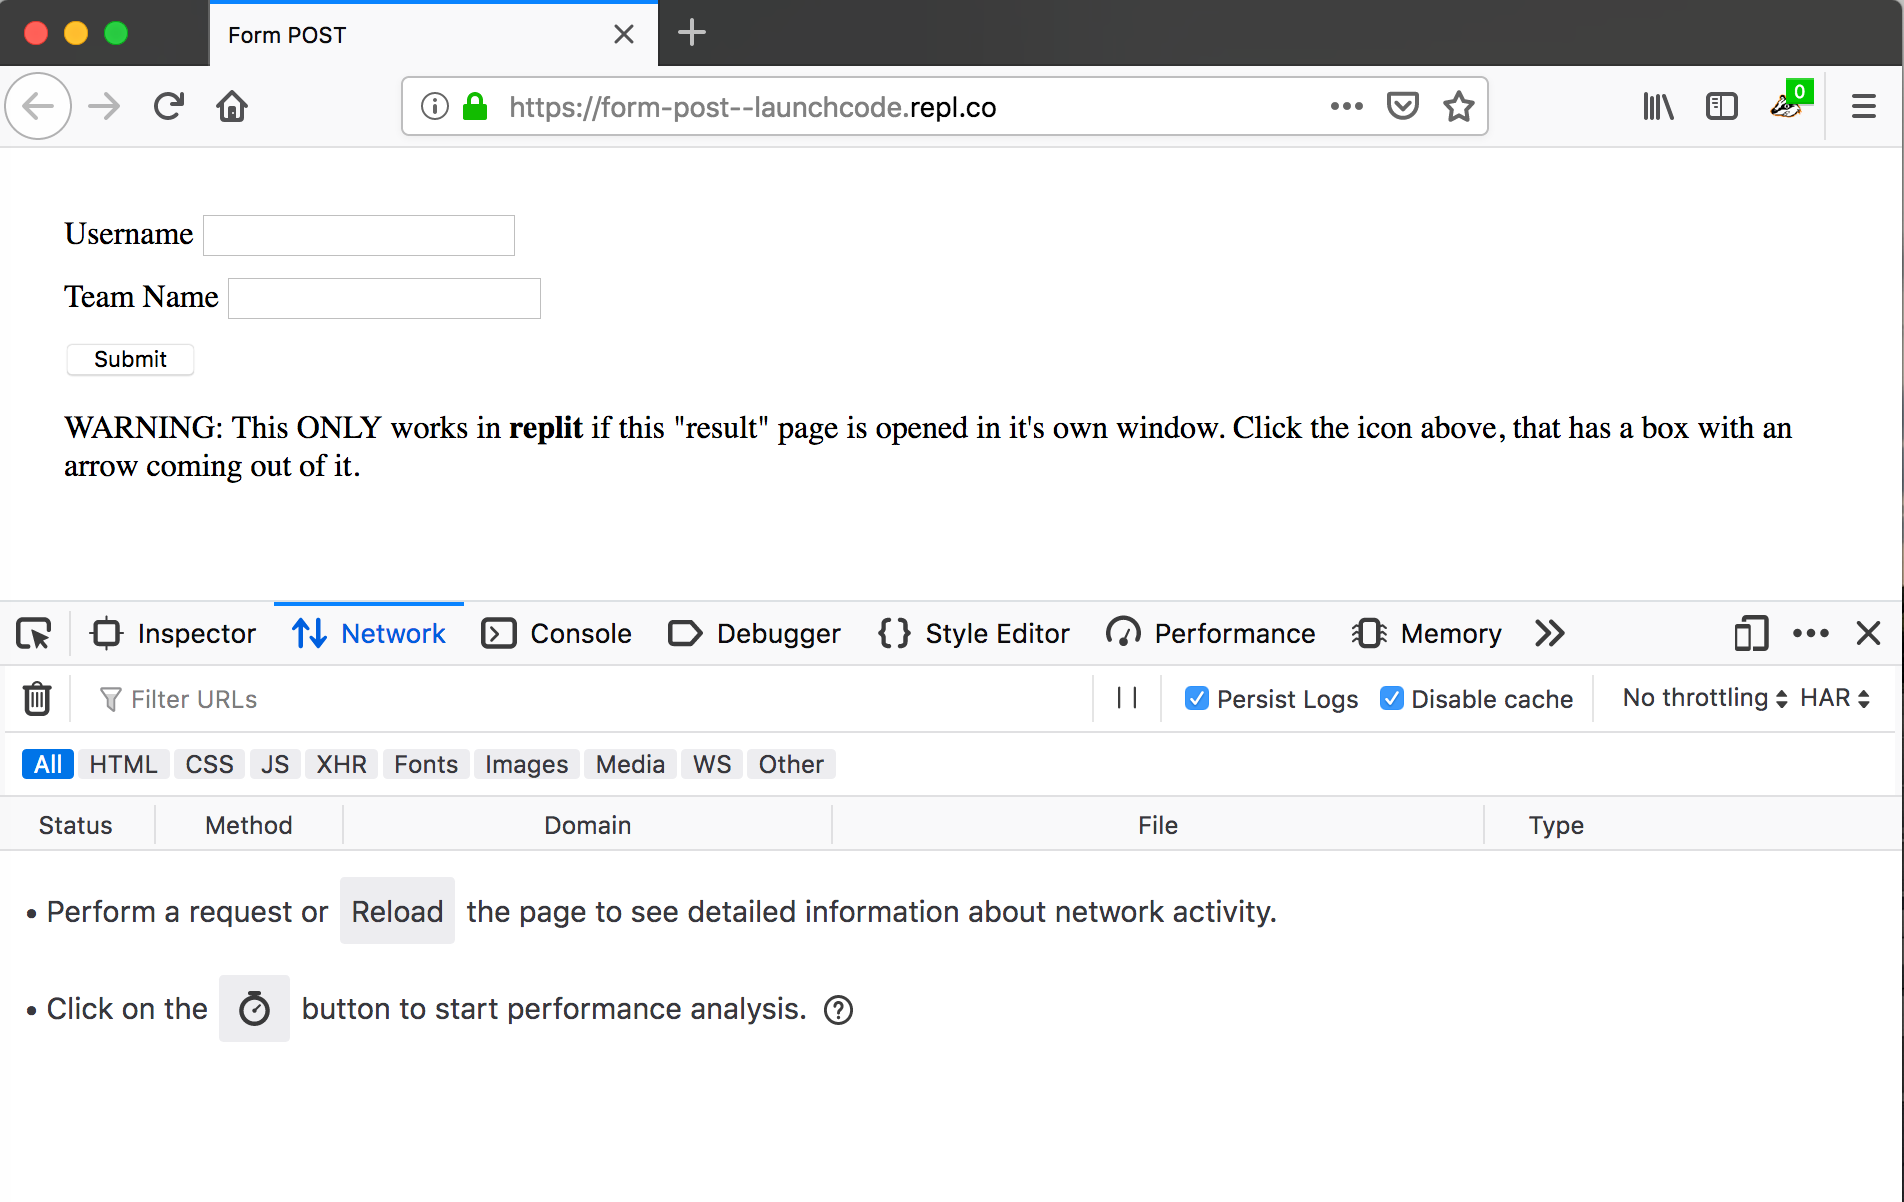 Screen shot of firefox browser with form loaded and network tab open.